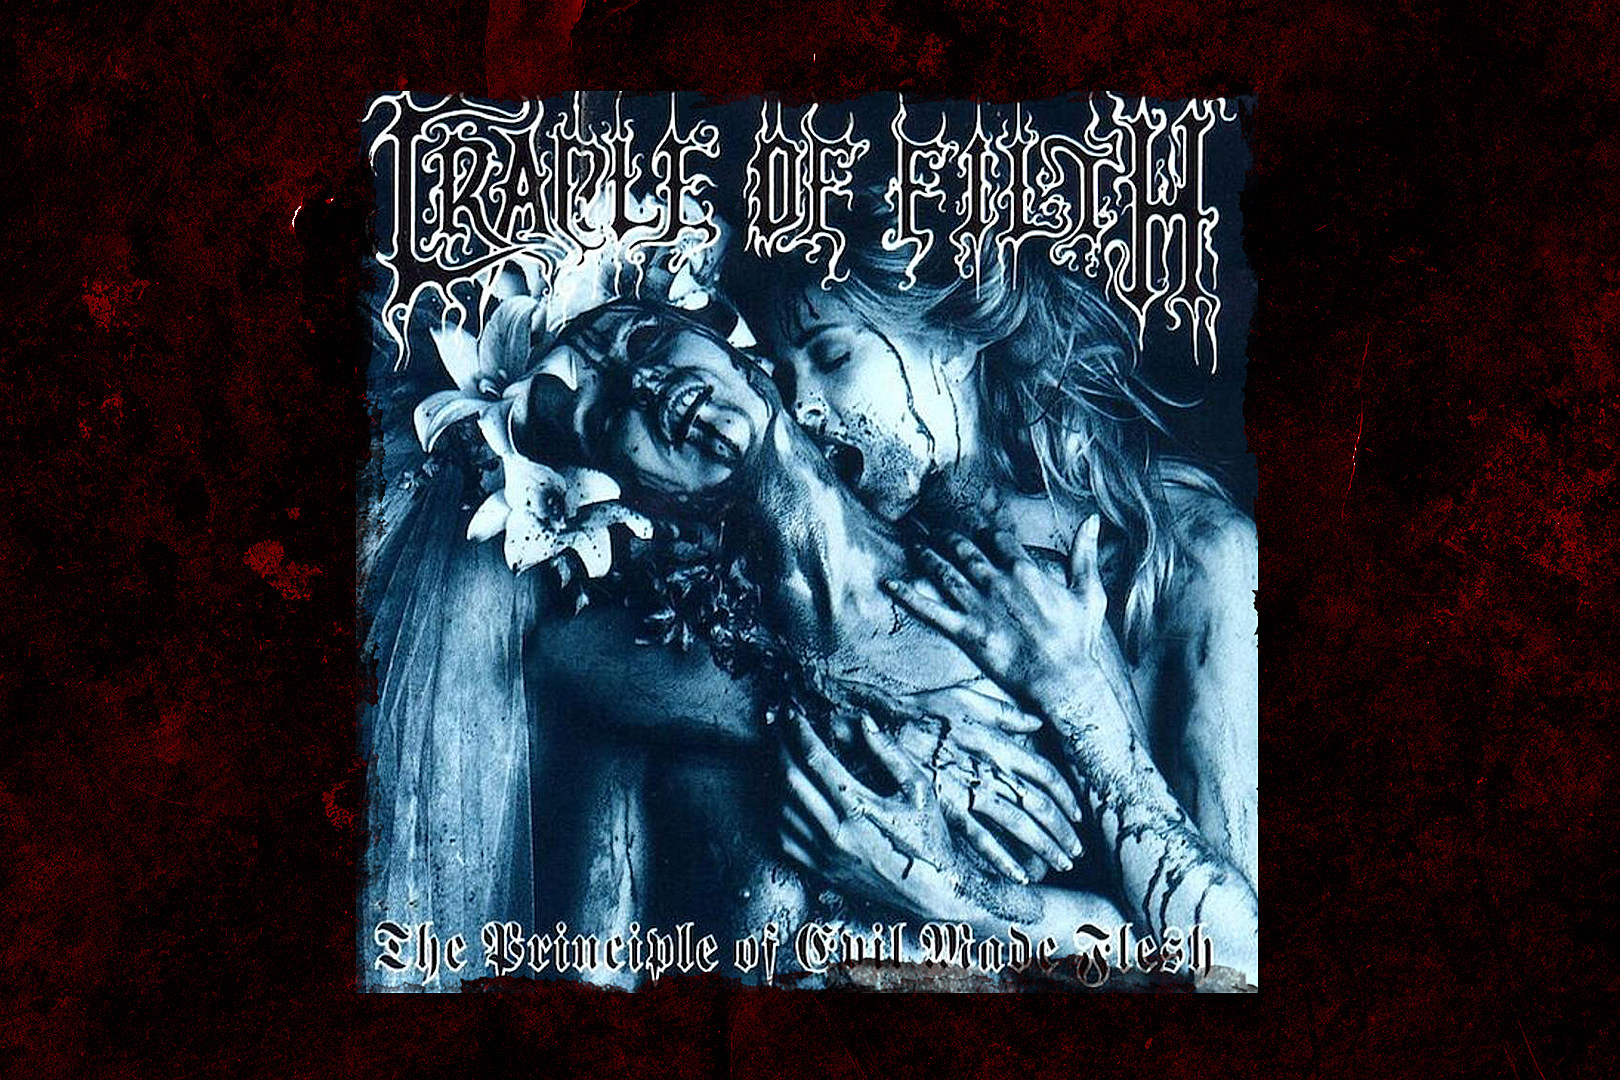 Cradle of Filth Reveal When They Hope to Release New Album